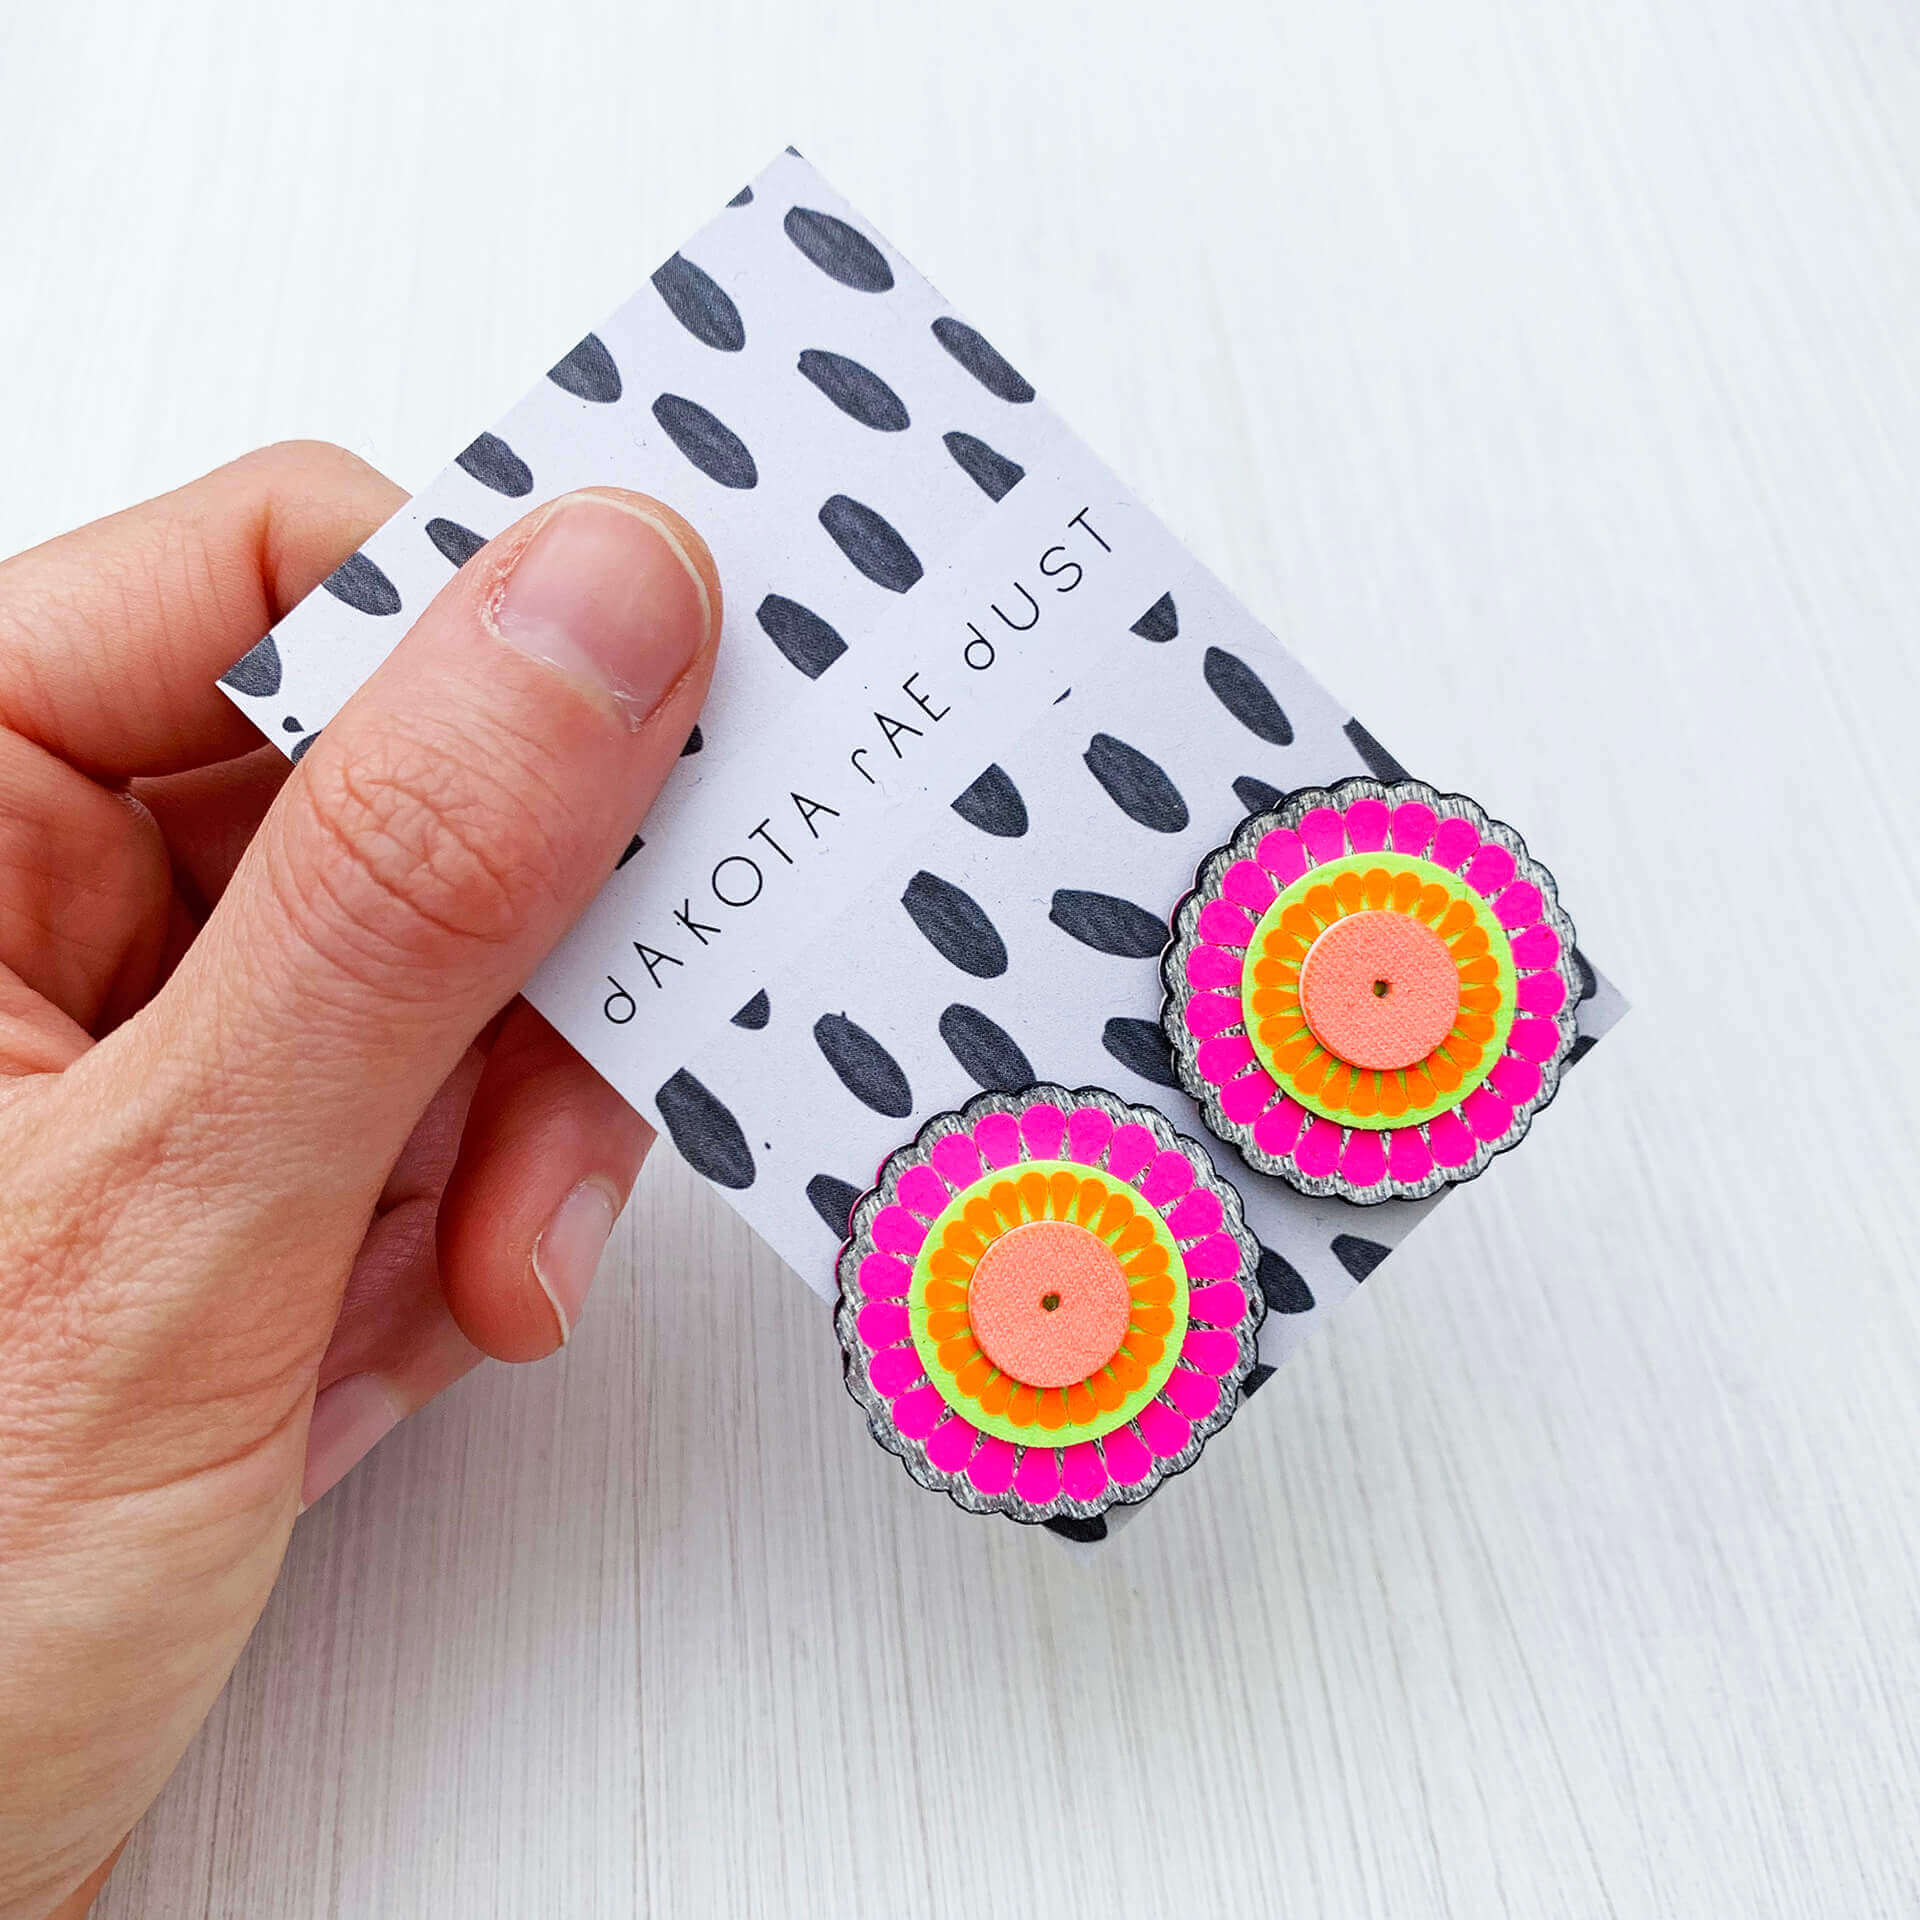 Bright pink and orange, colourful oversize studs, mounted on a black and white patterned swing tag, printed with the dakota rae dust logo. The earrings are held in a hand over an off white background. only the thumb and fingers are visible.